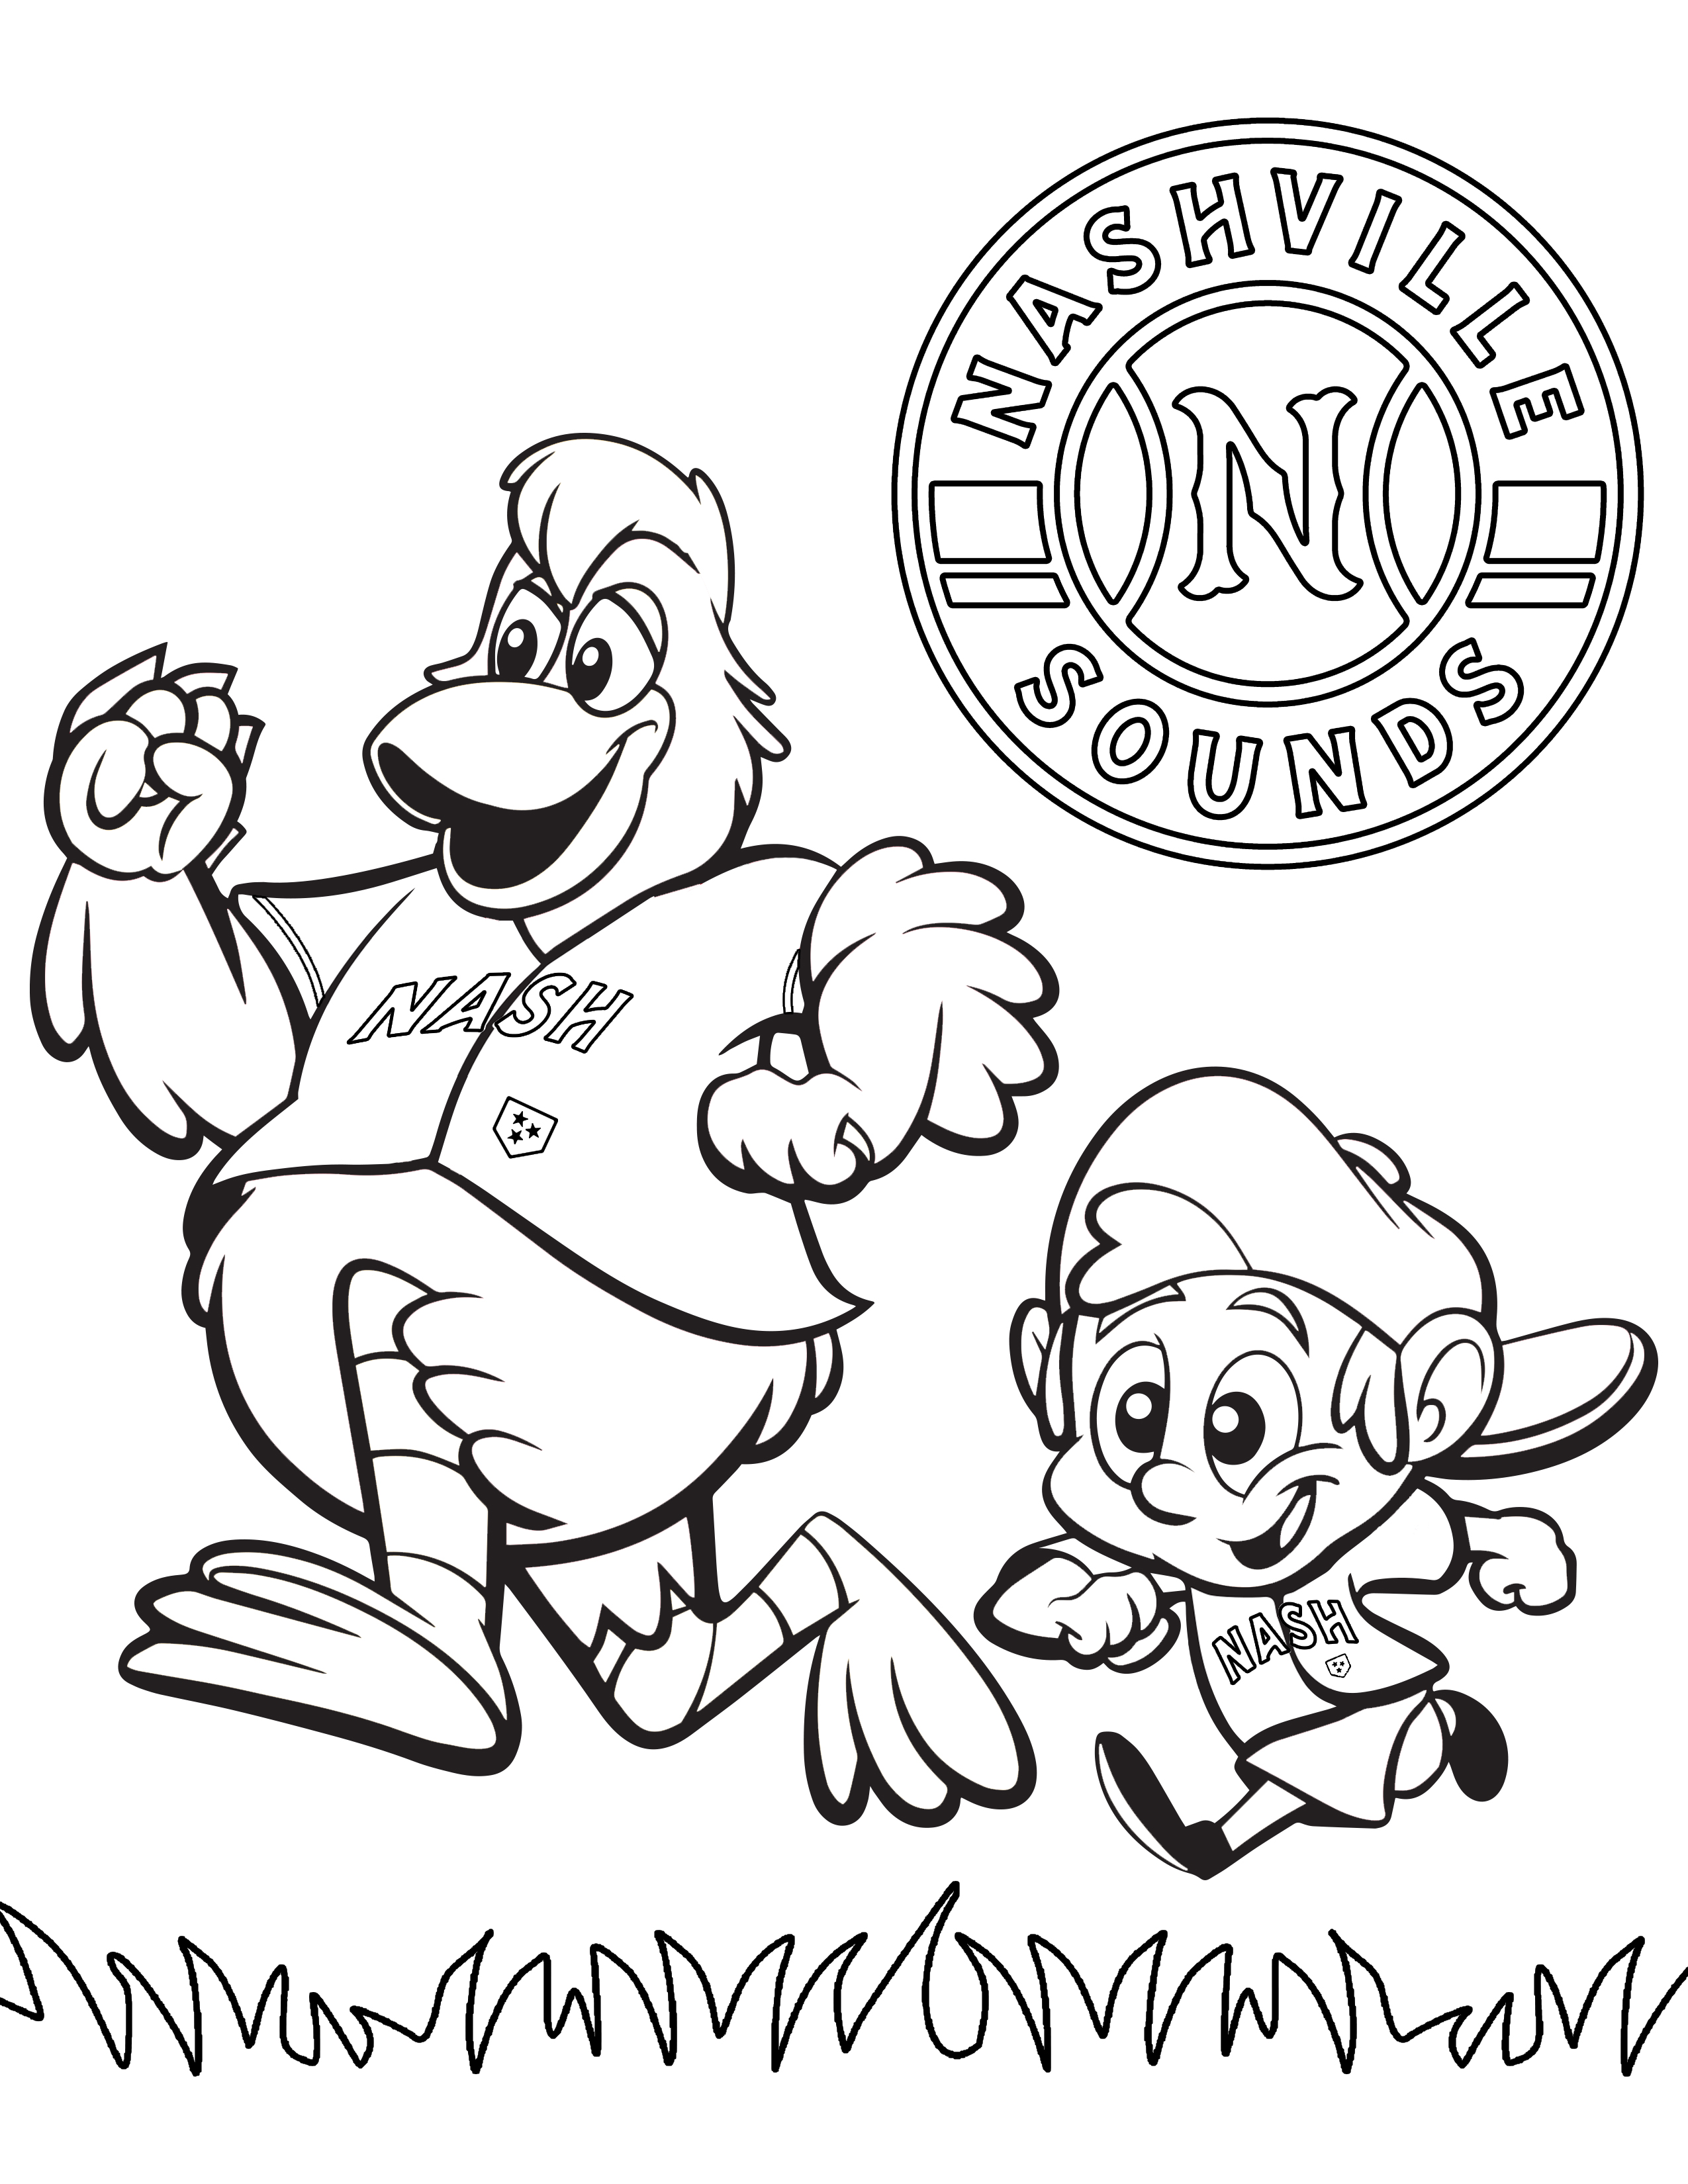 Nashville sounds on x happy coloring ð download soundsbooster coloring sheets here httpstcorfvksnao httpstcoiycpzyh x